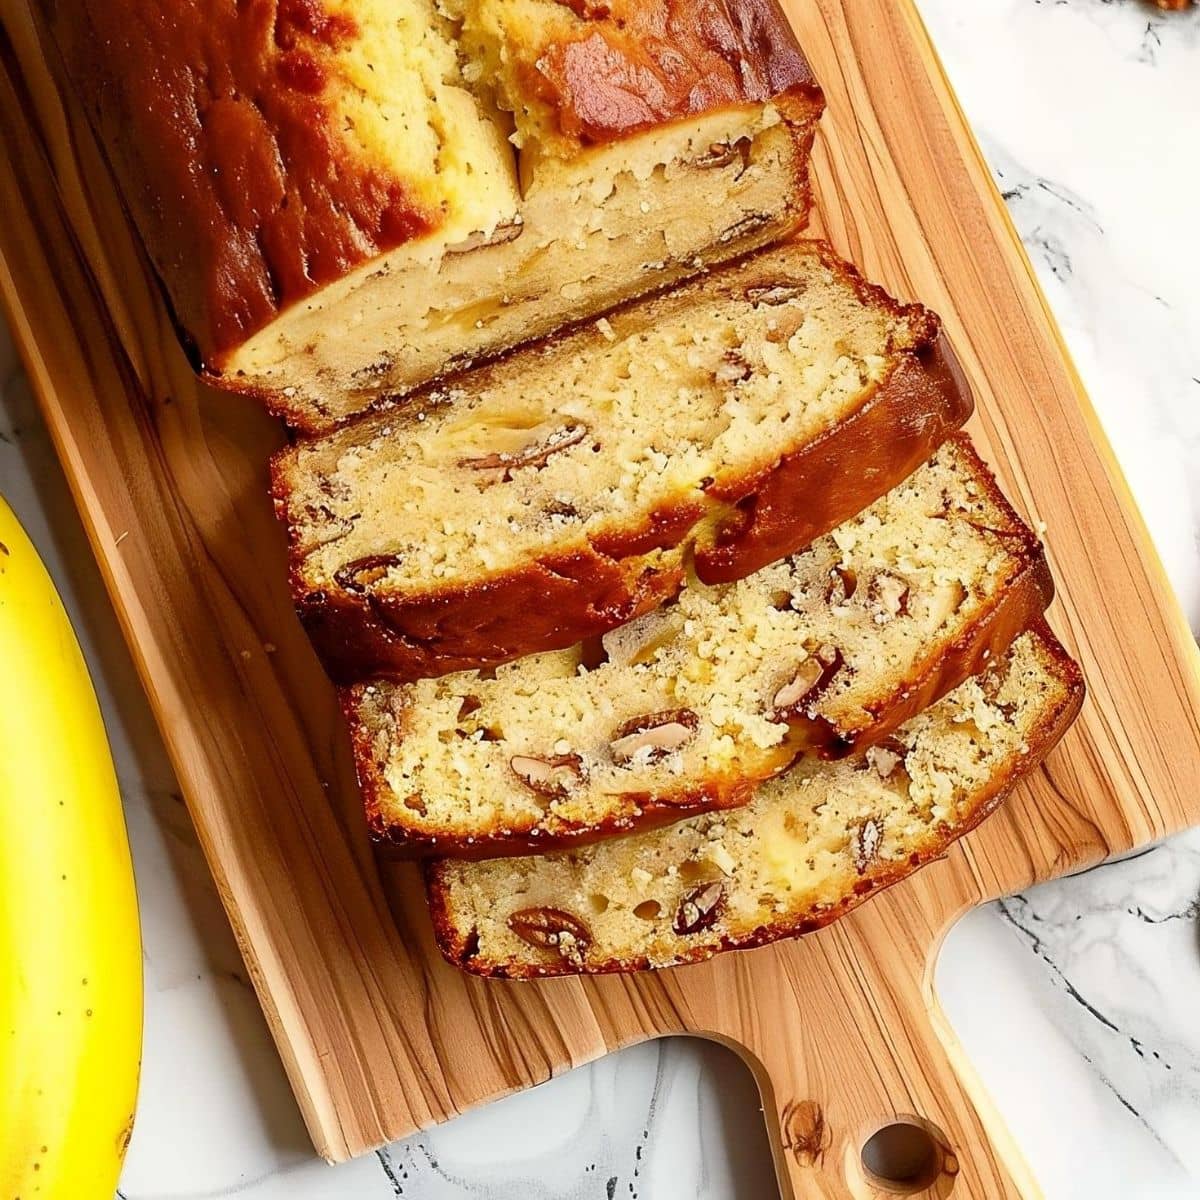 Top View of a Loaf of Cake Mix Banana Bread, Sliced, on a Wooden Cutting Board with a Banana on a White Marble Table